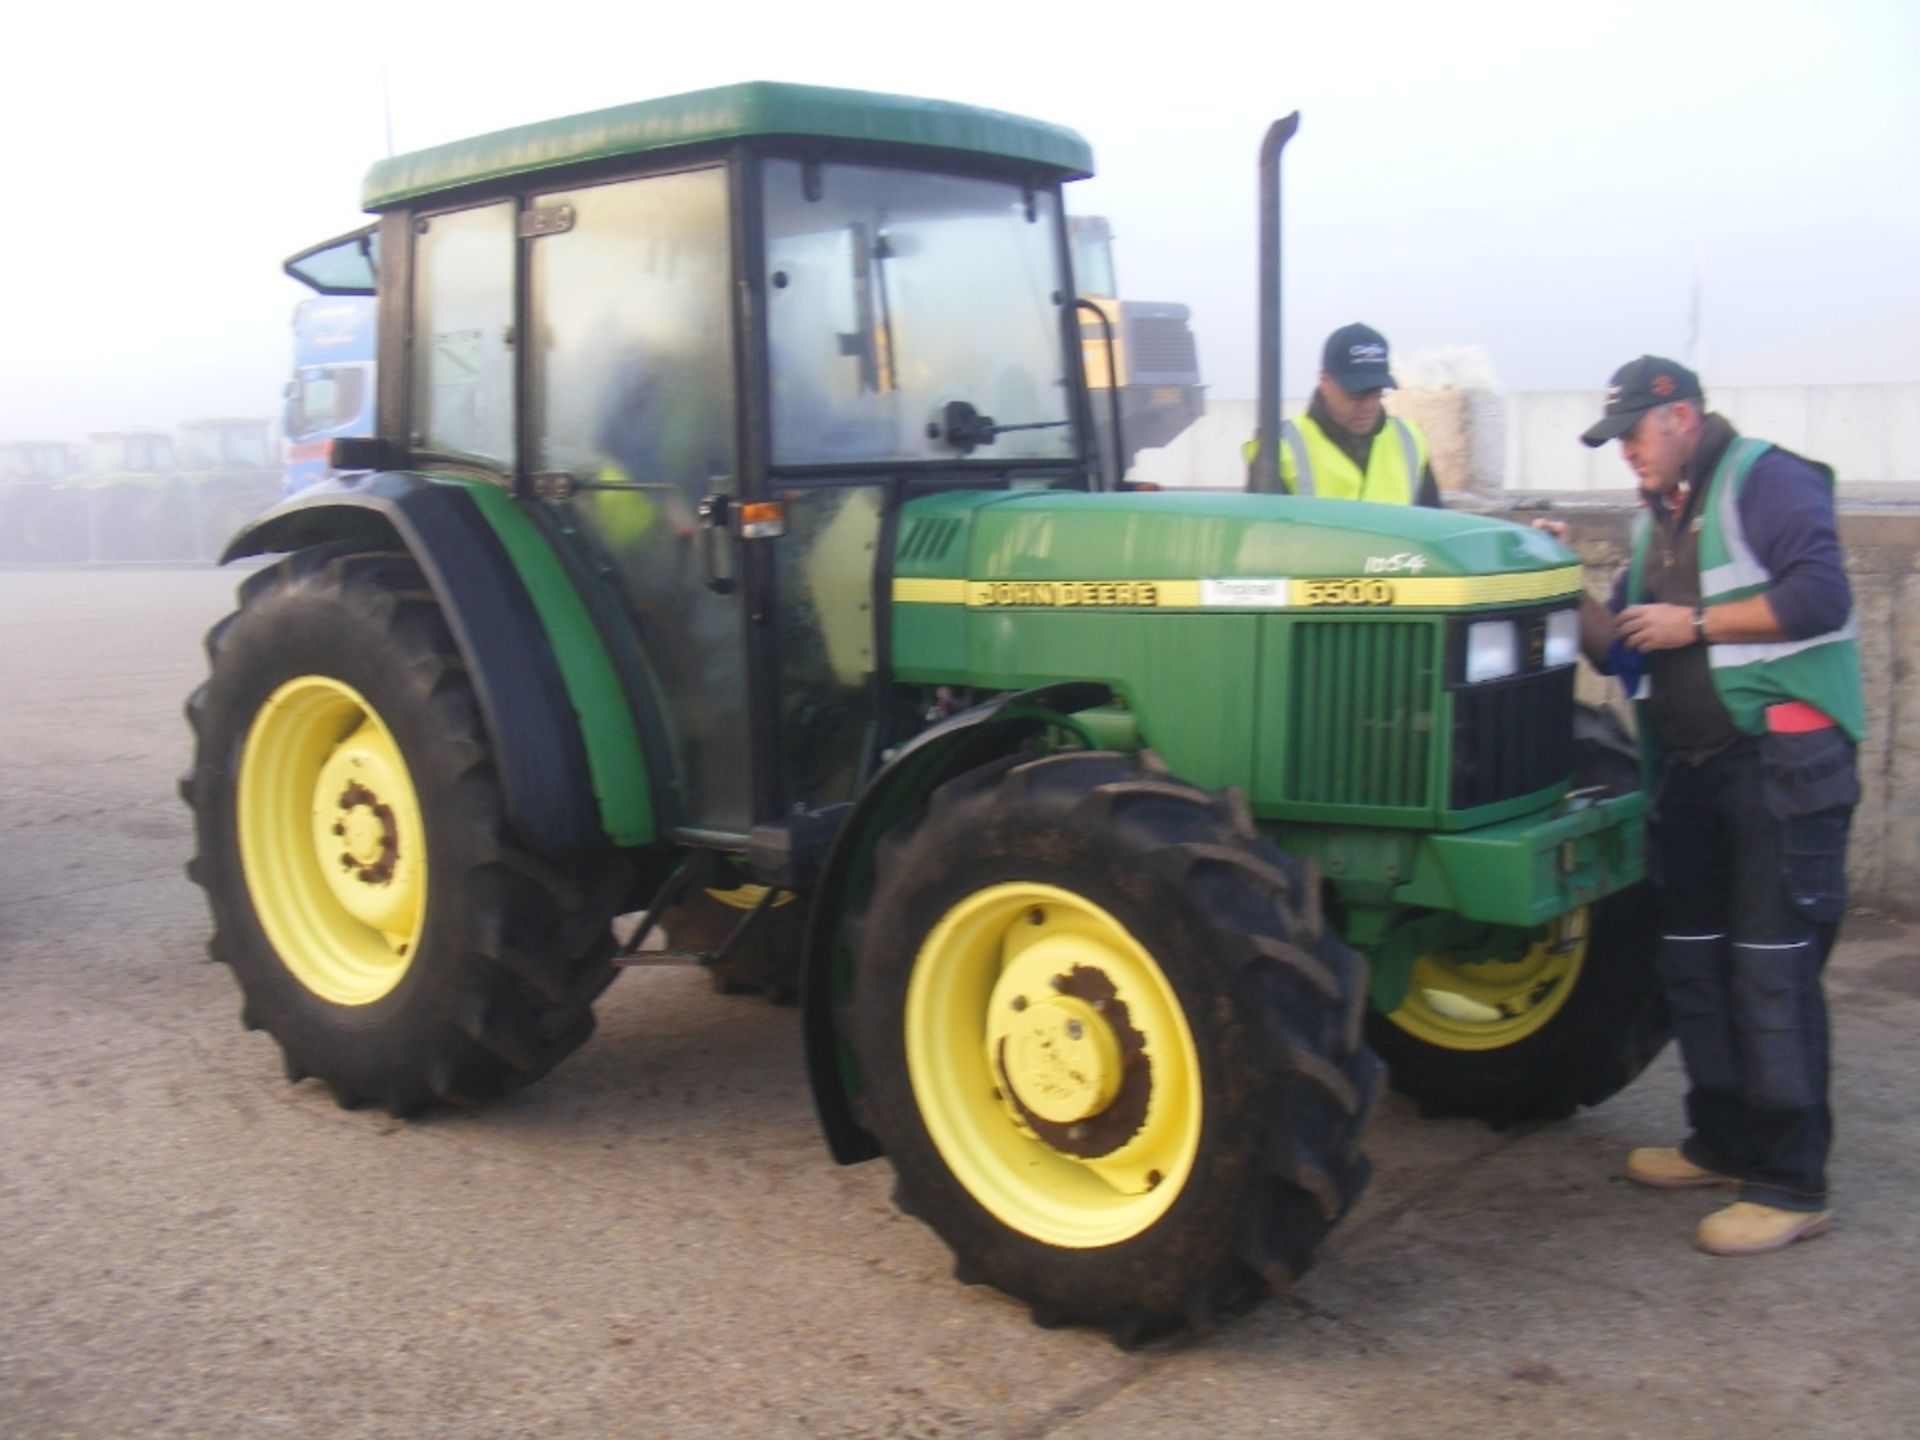 John Deere 5500 4wd Tractor 3000 Hrs Reg. No. Y462 NYD - Image 3 of 5